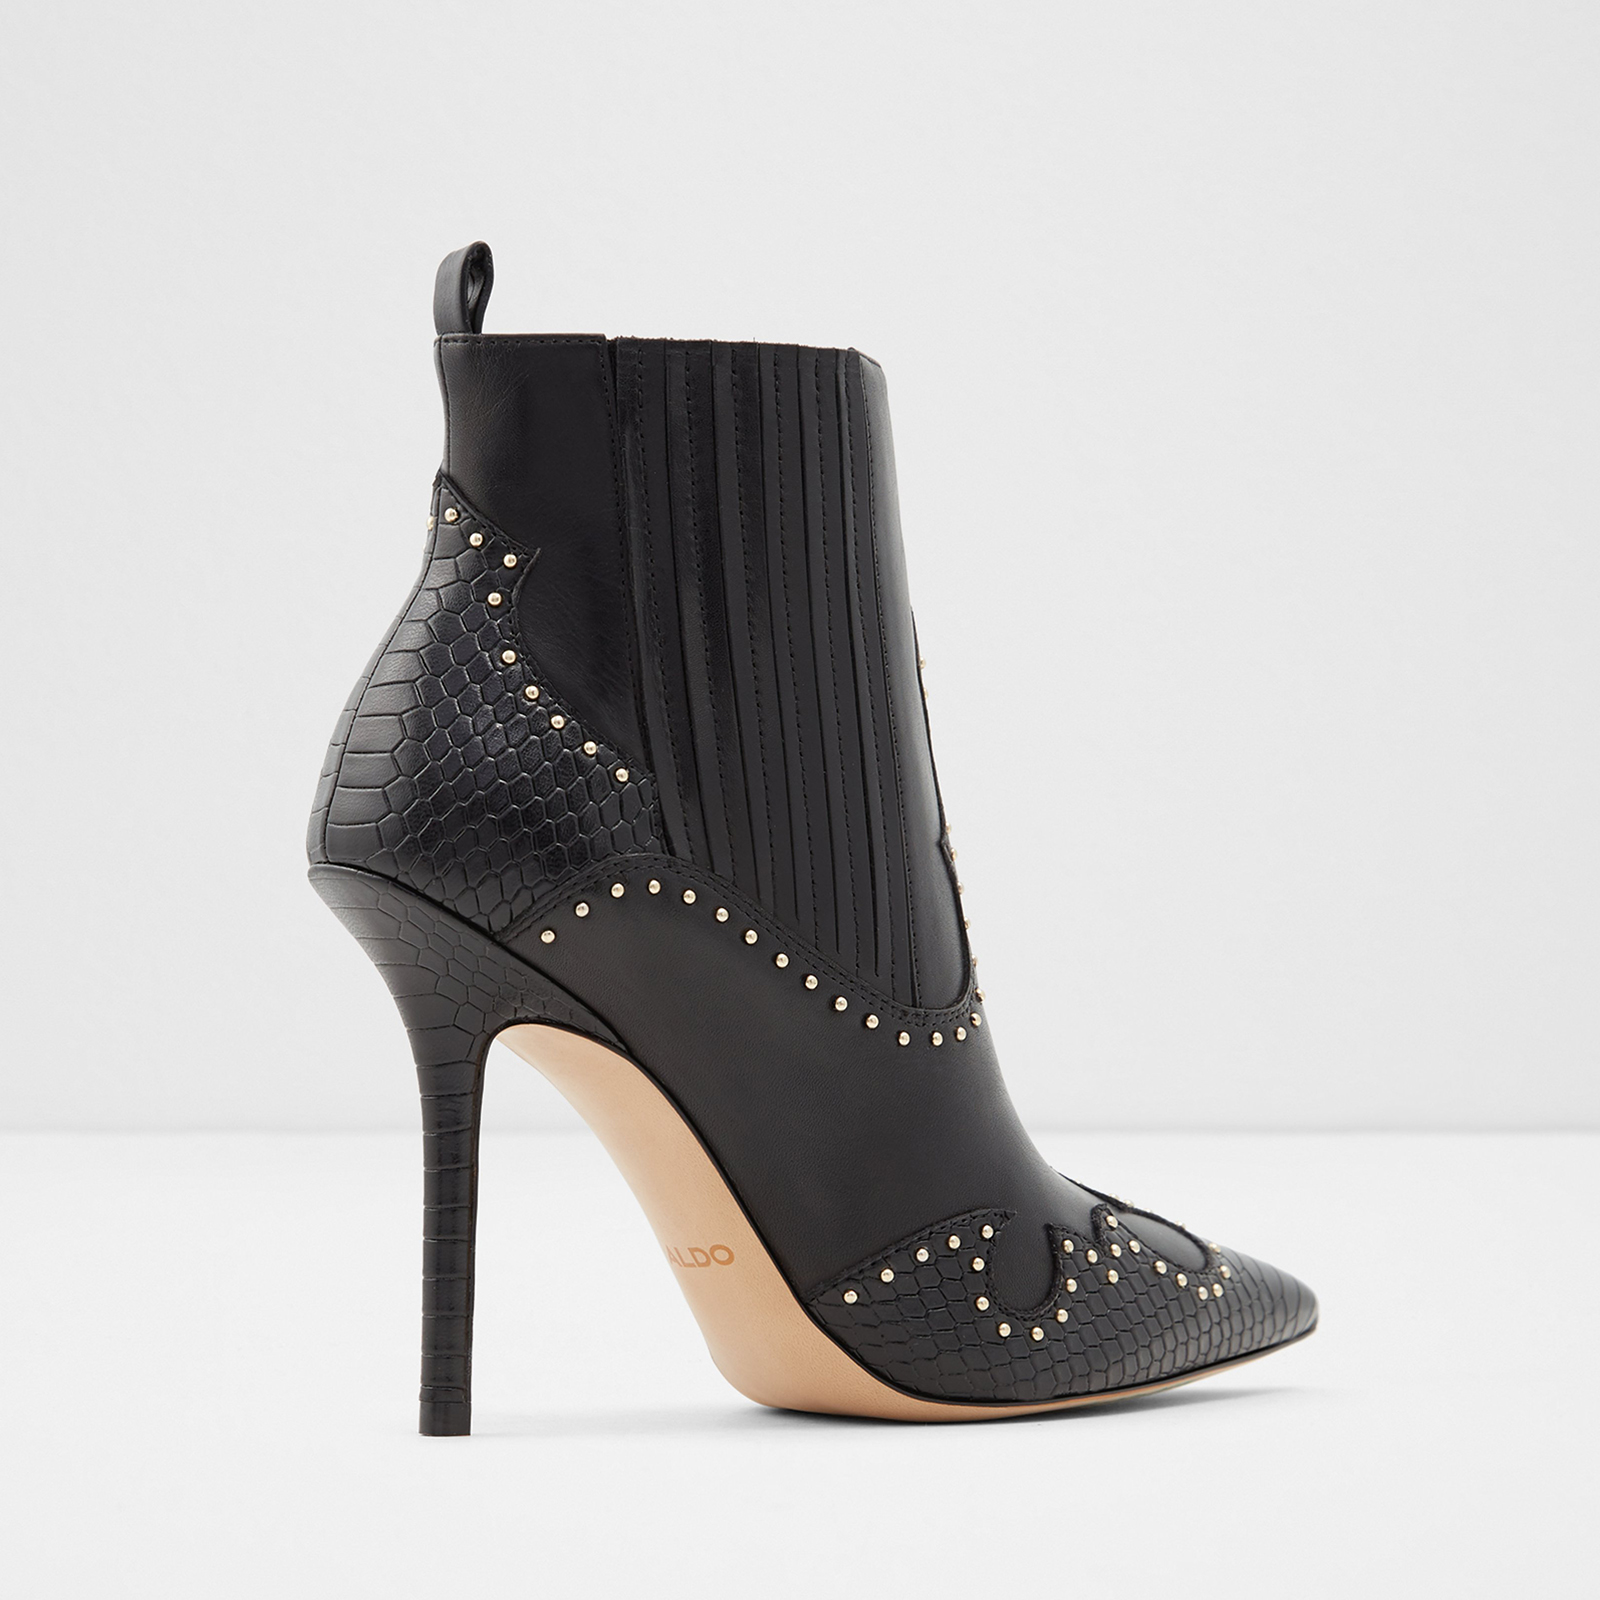 Brenda Black Leather Pointed-Toe Cutout Ankle Booties